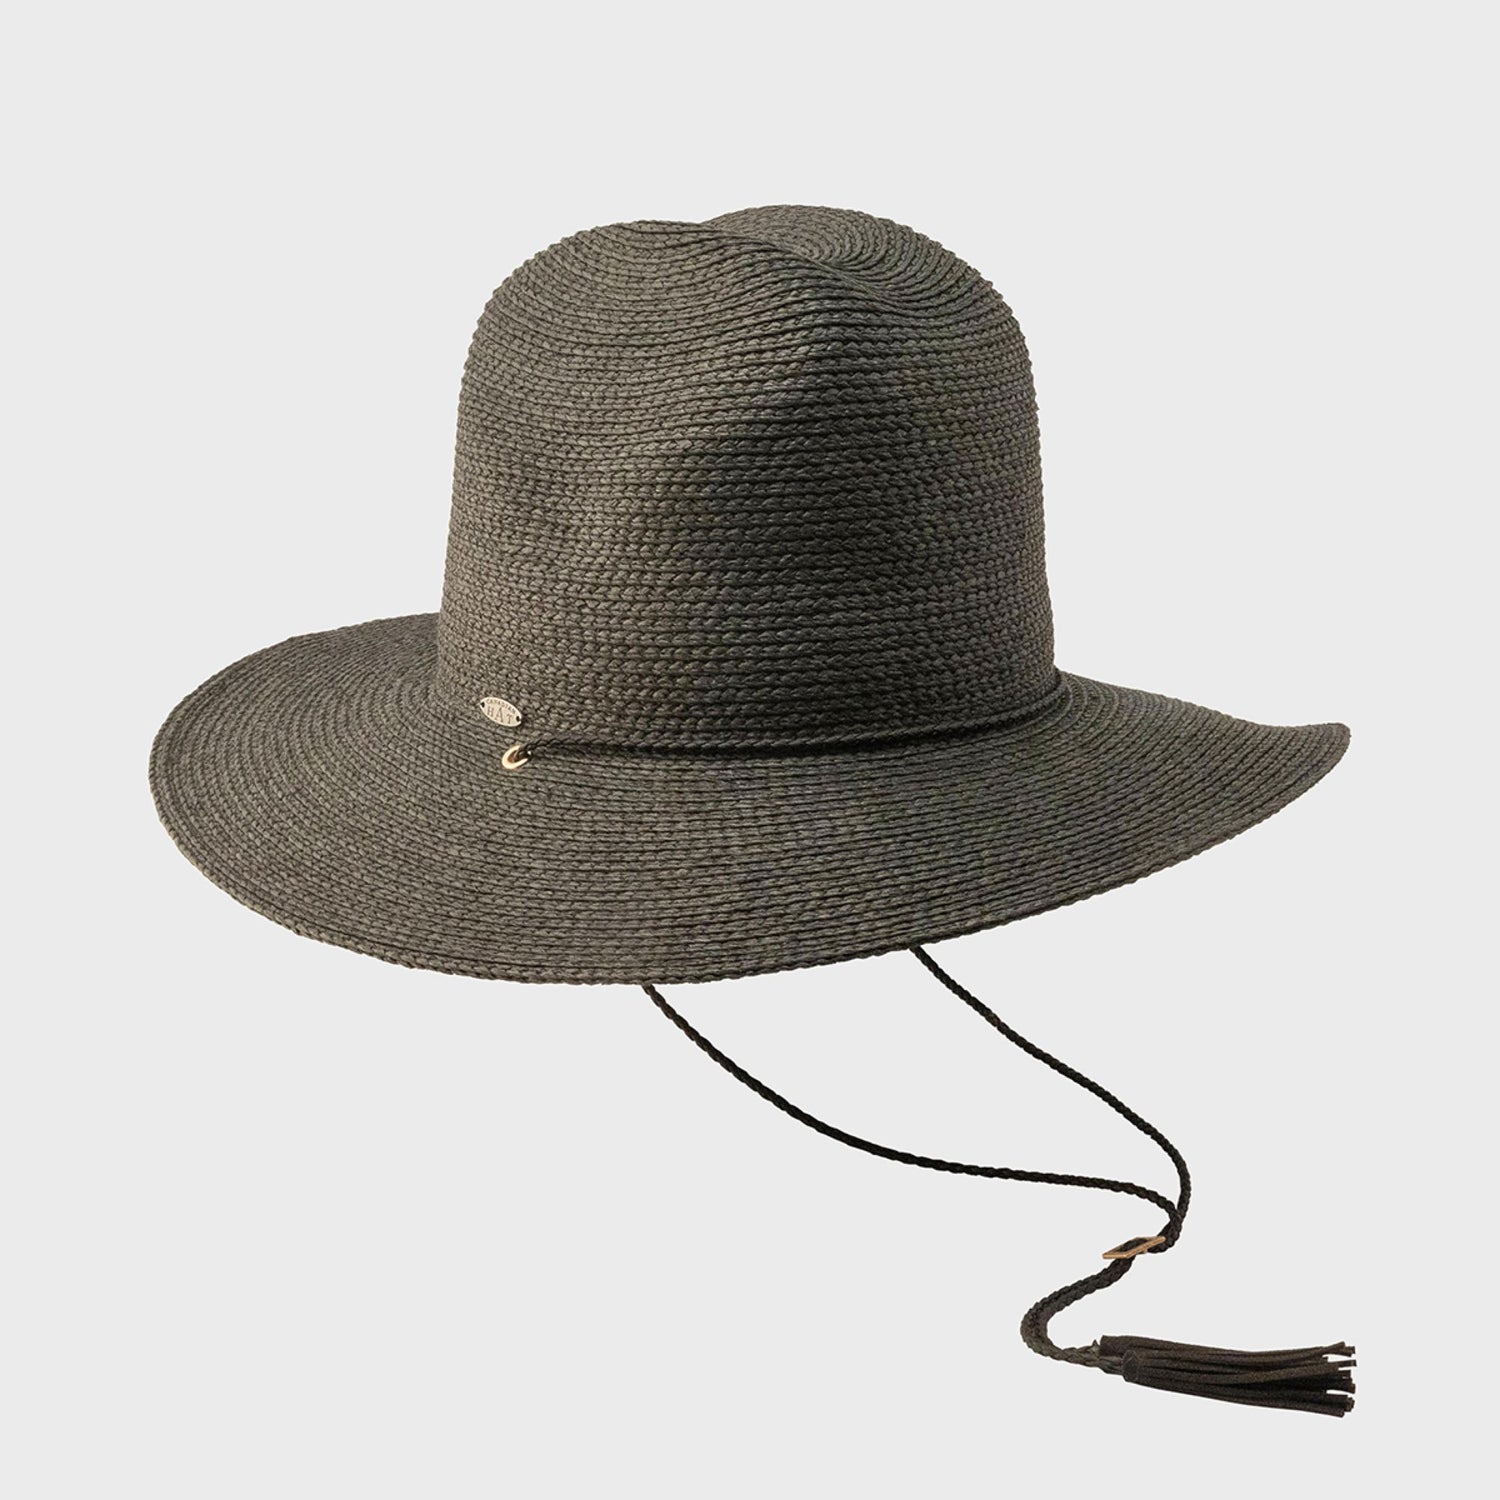 OPIA - LARGE OUTBACK BUCKET HAT W CORD